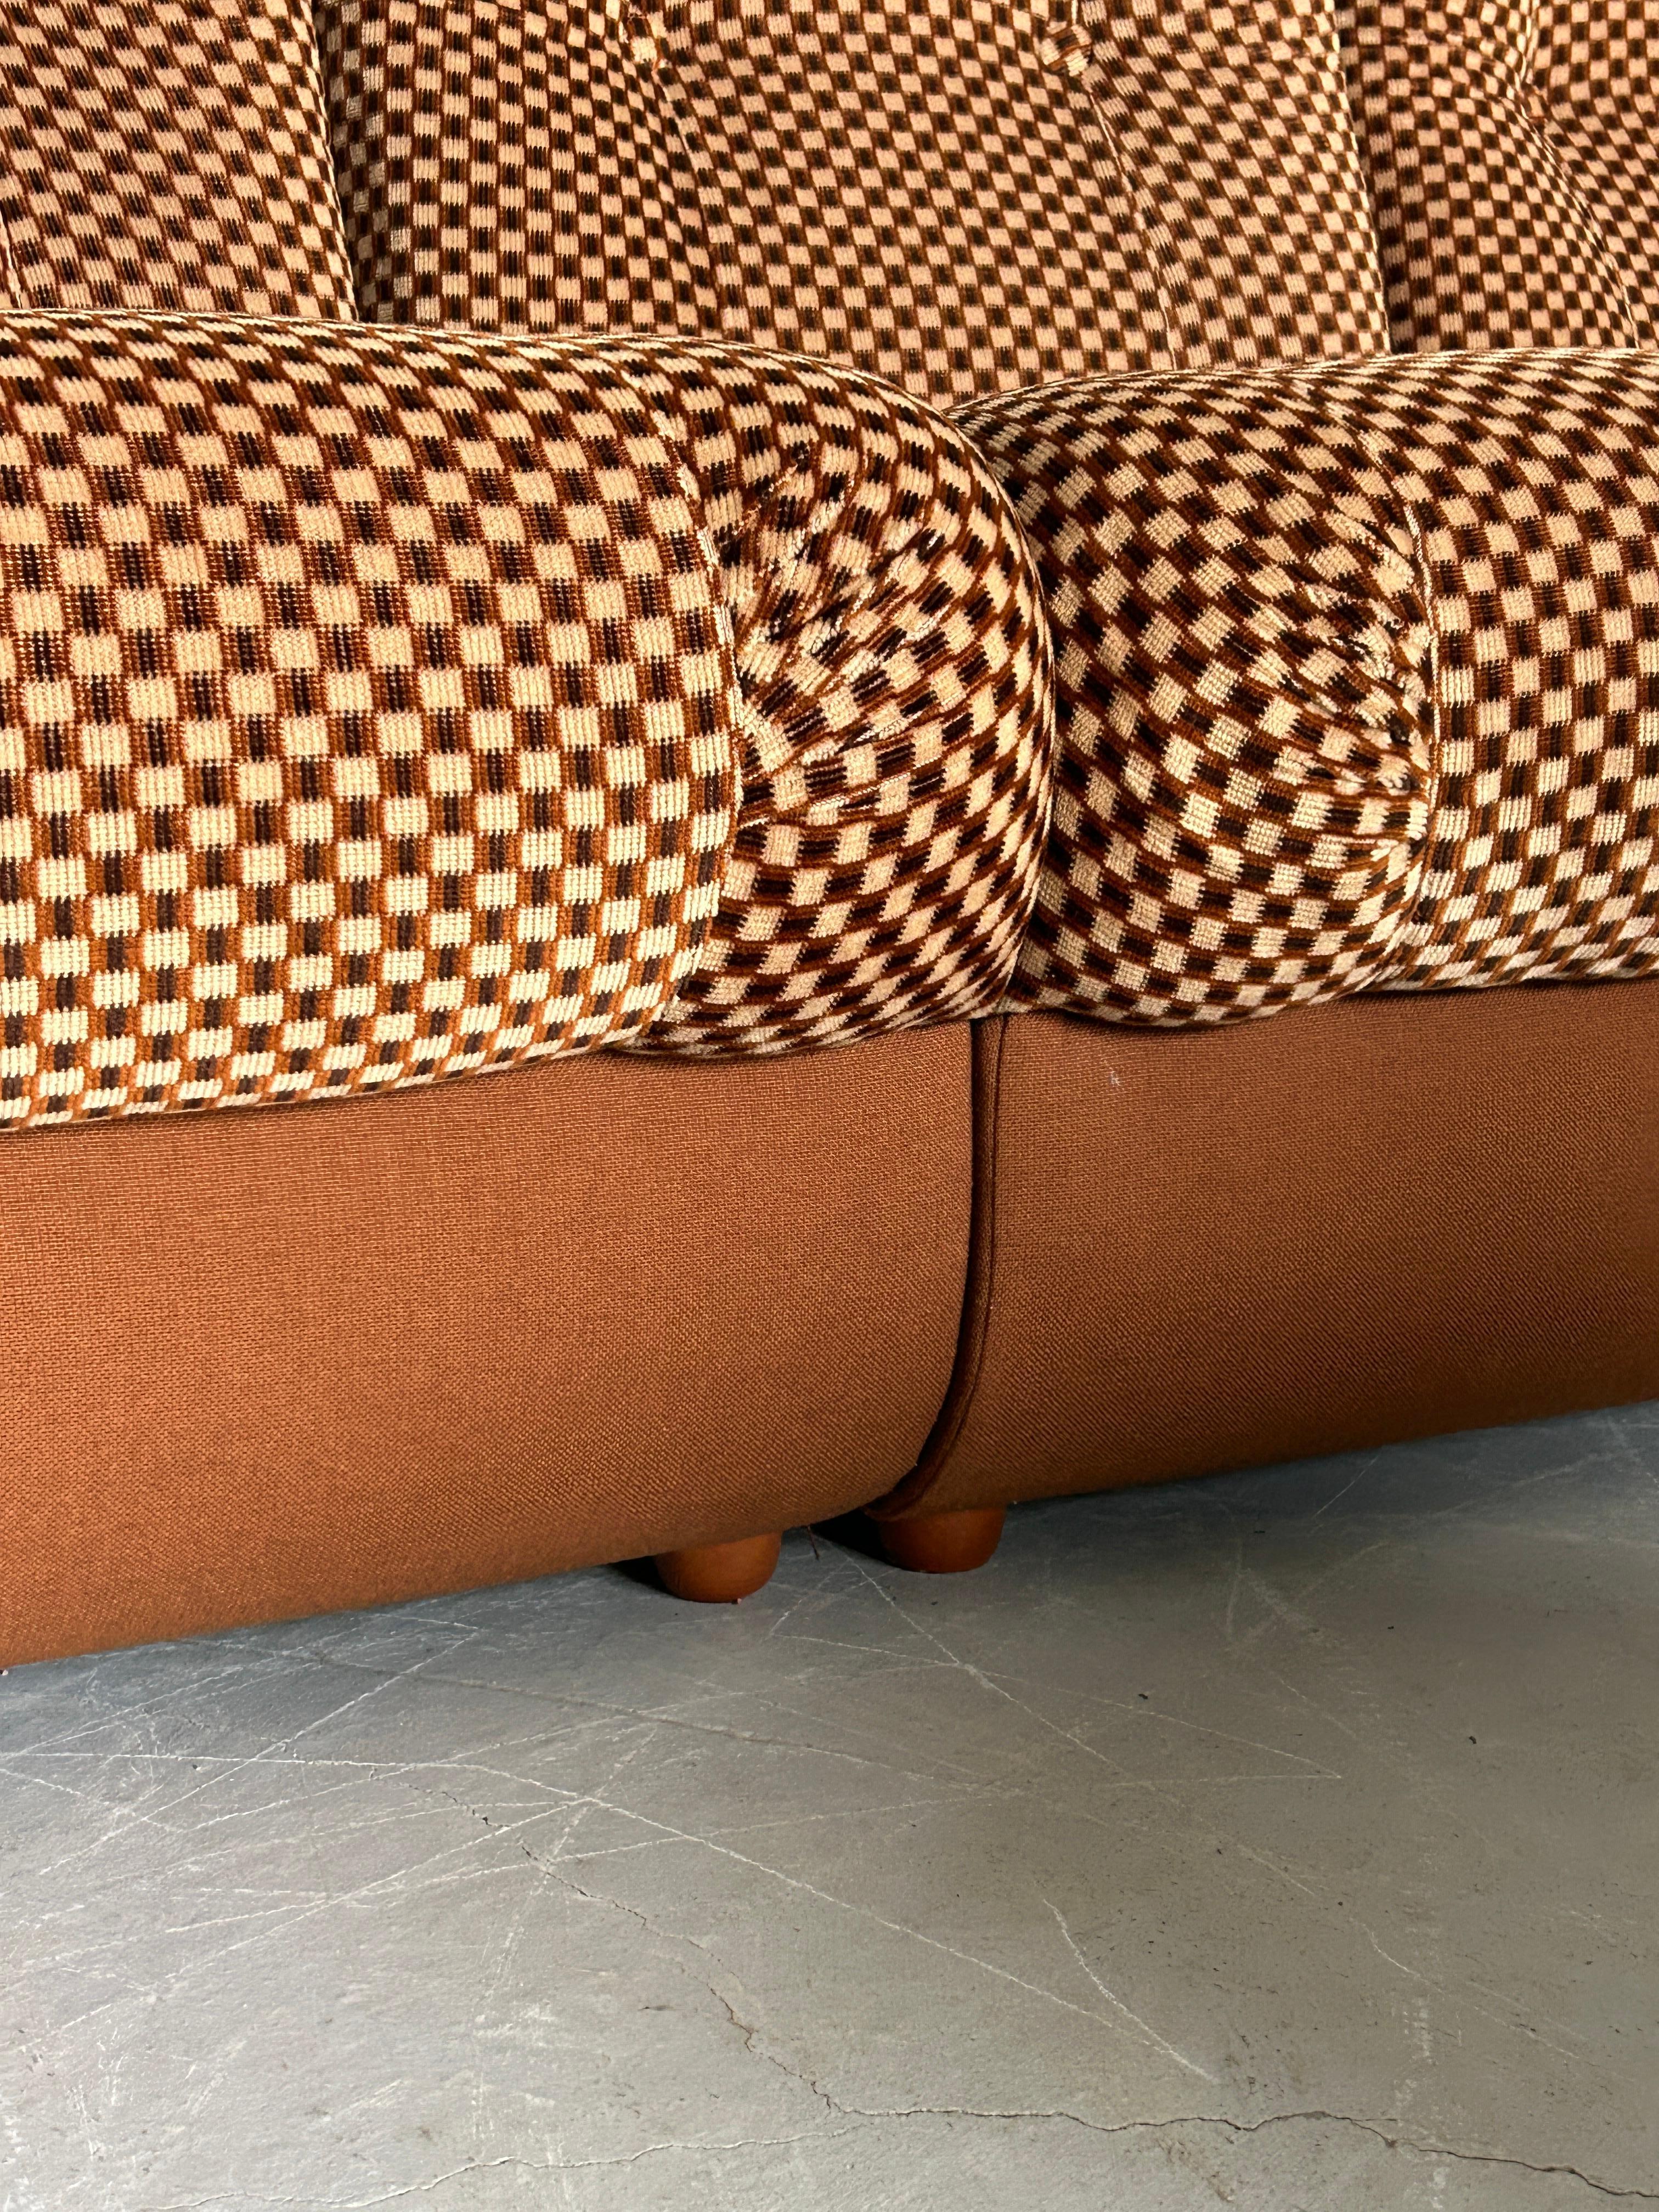 Large Space Age Cloud Modular Sofa Set in Brown Striped Fabric, Italy 1960s For Sale 3